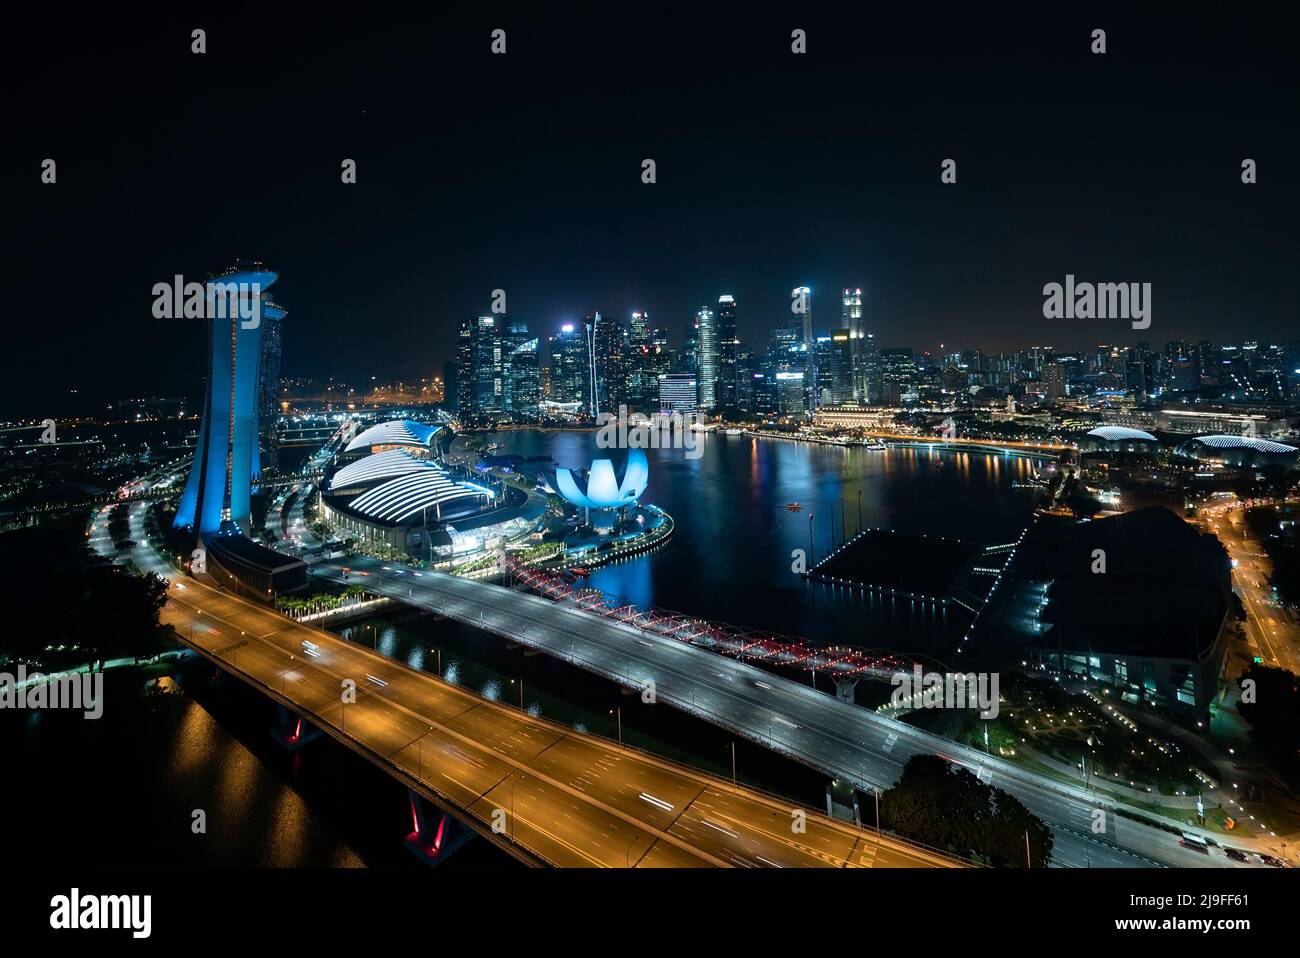 Singapore May 22nd 2022 - Cityscape of the Singapore financial business district at night Stock Photo